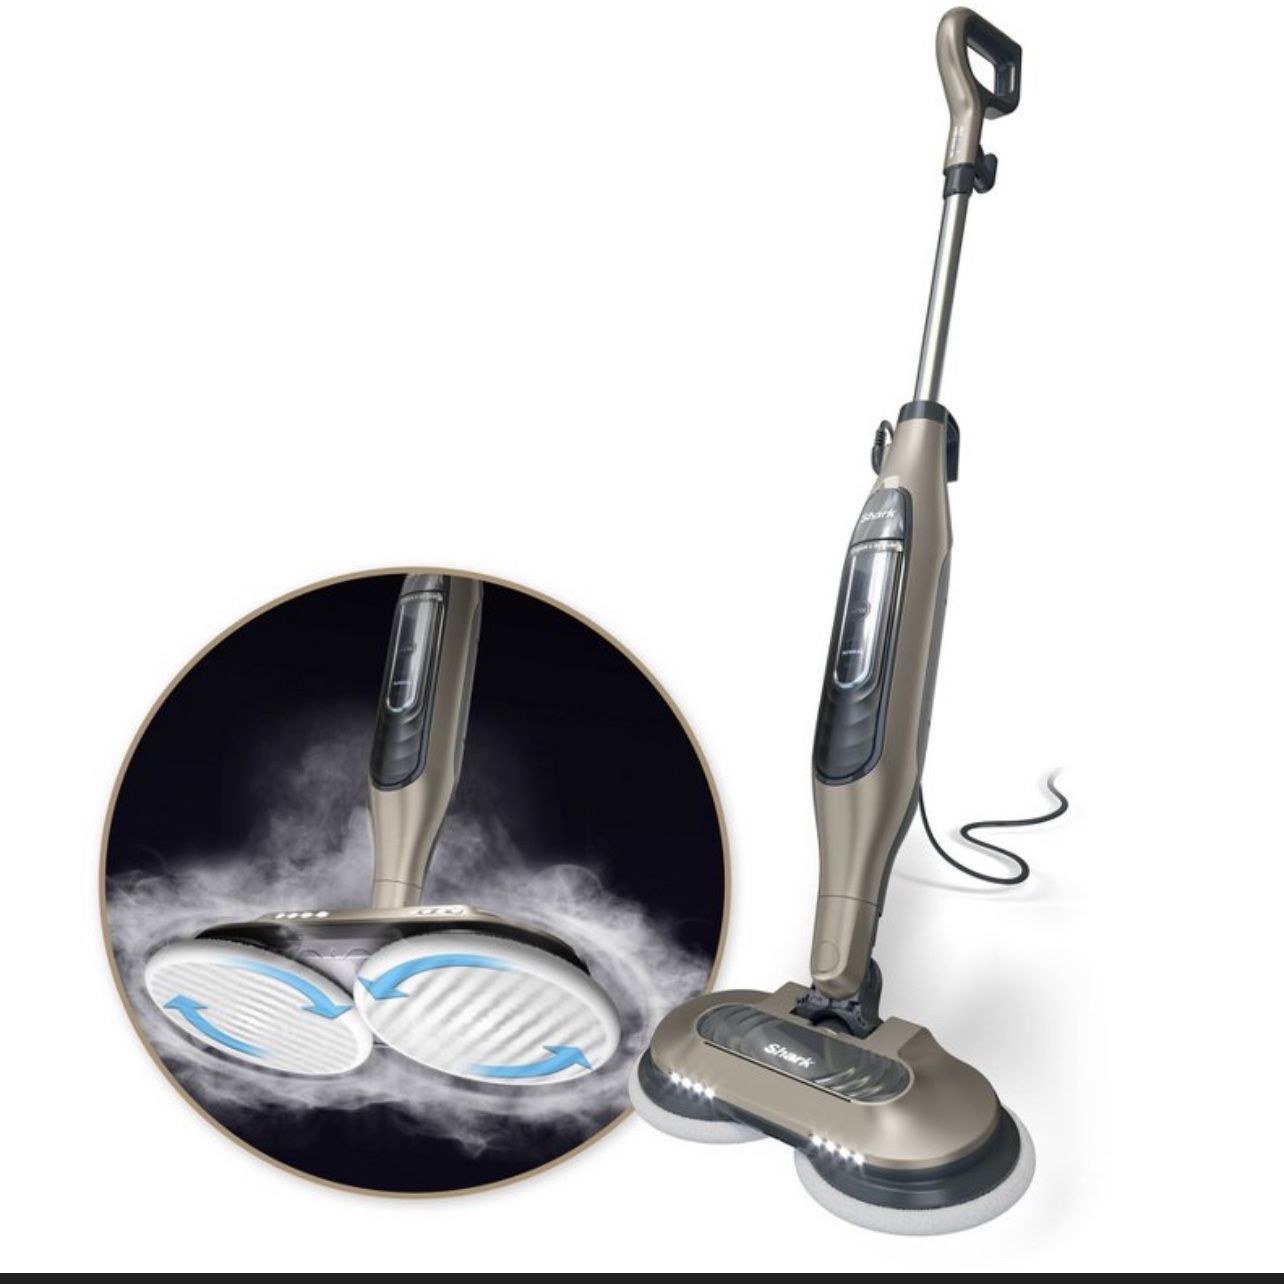 Shark S7001 All-in-one scrubbing and sanitizing* steam